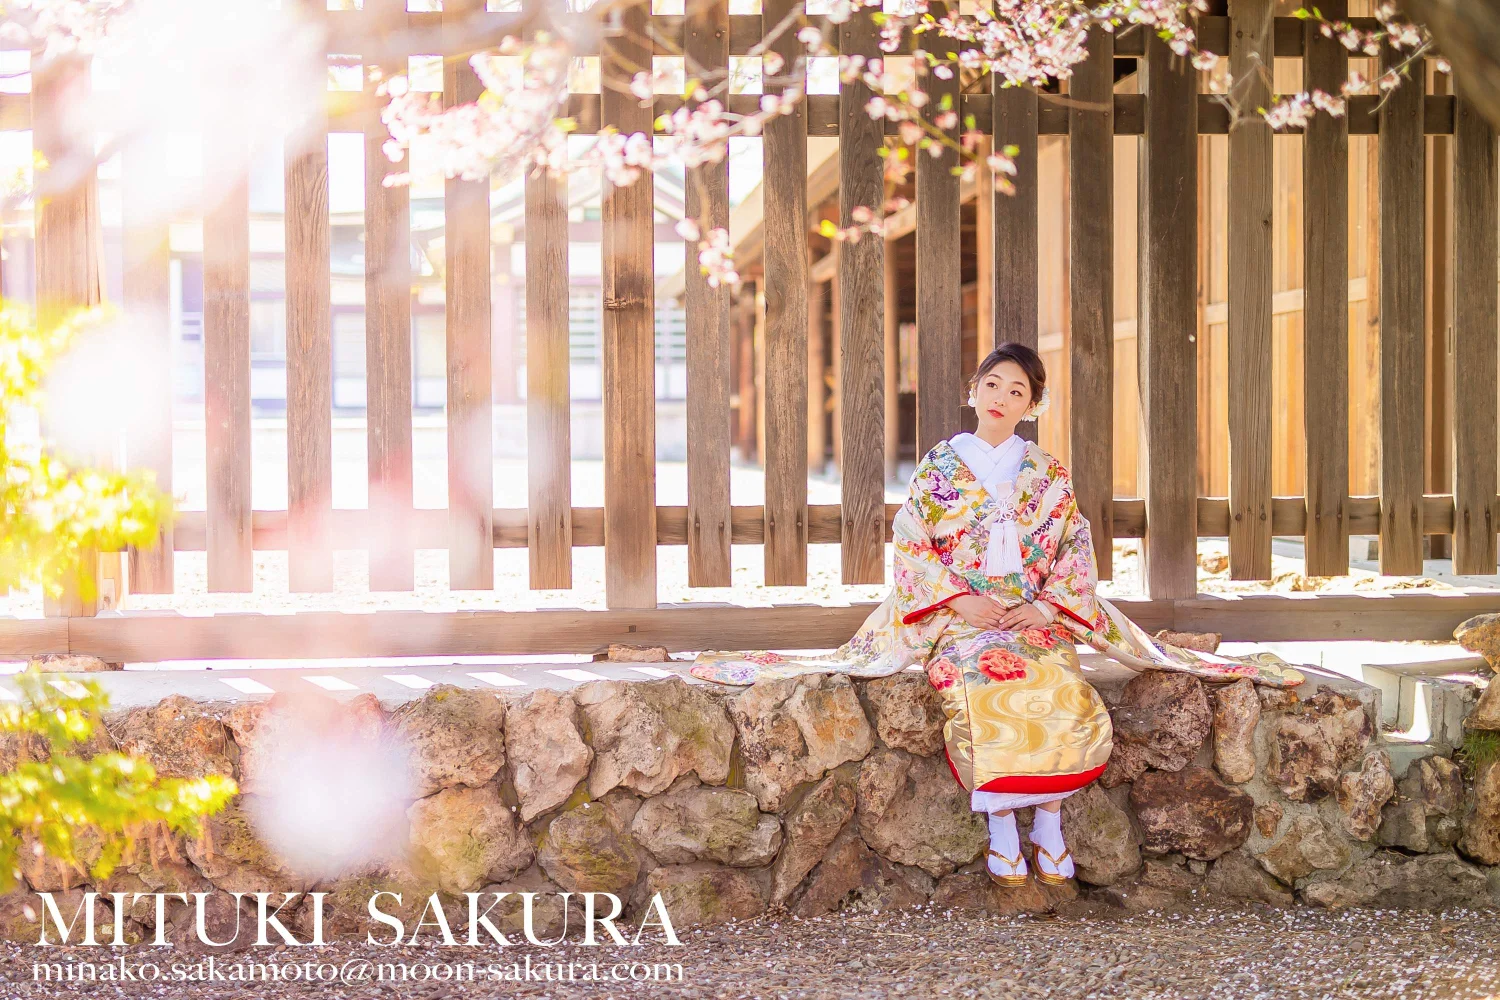 Enjoy strolling through the streets of Sapporo wearing luxurious furisode.